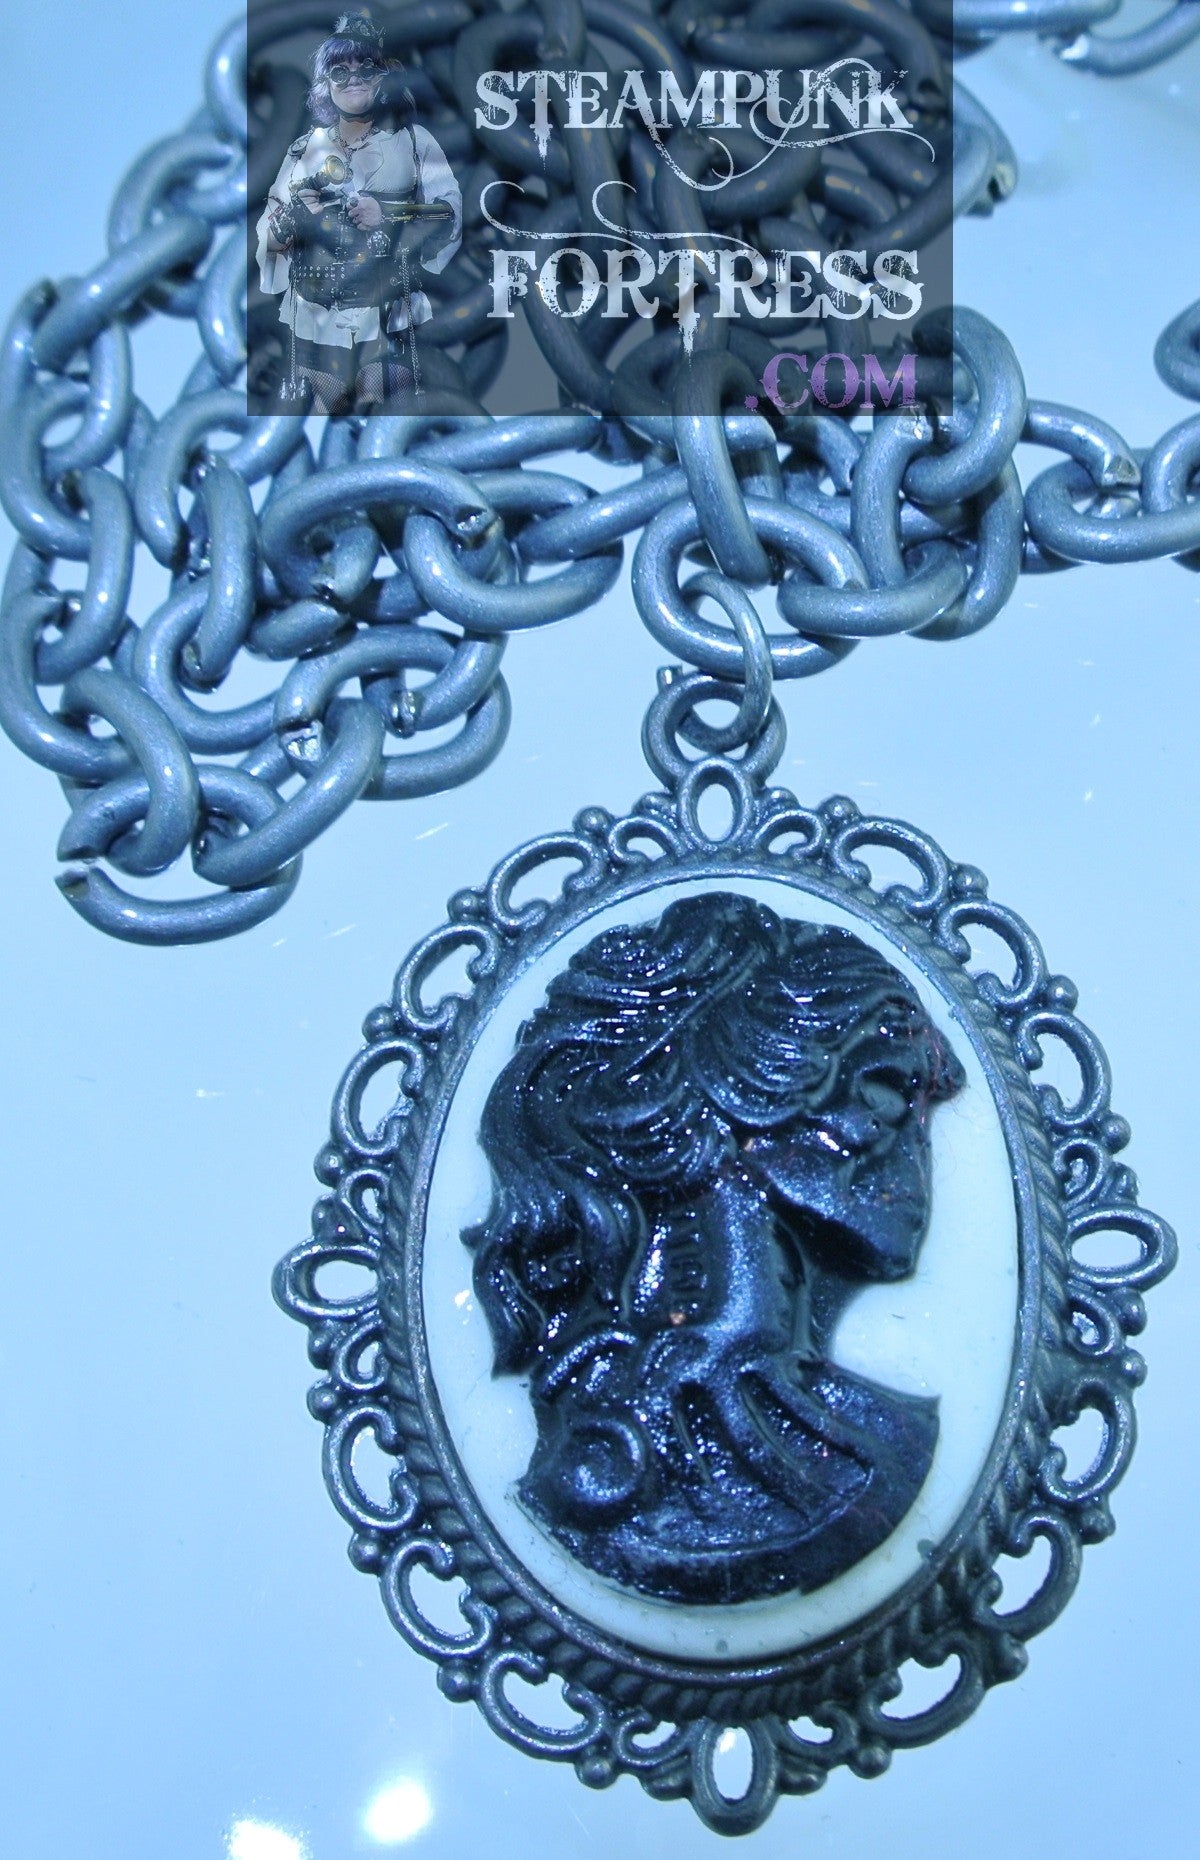 GLOW IN THE DARK SILVER CAMEO LADY SKELETON GLOW IN THE DARK BACKGROUND NECKLACE HALLOWEEN STARR WILDE STEAMPUNK FORTRESS